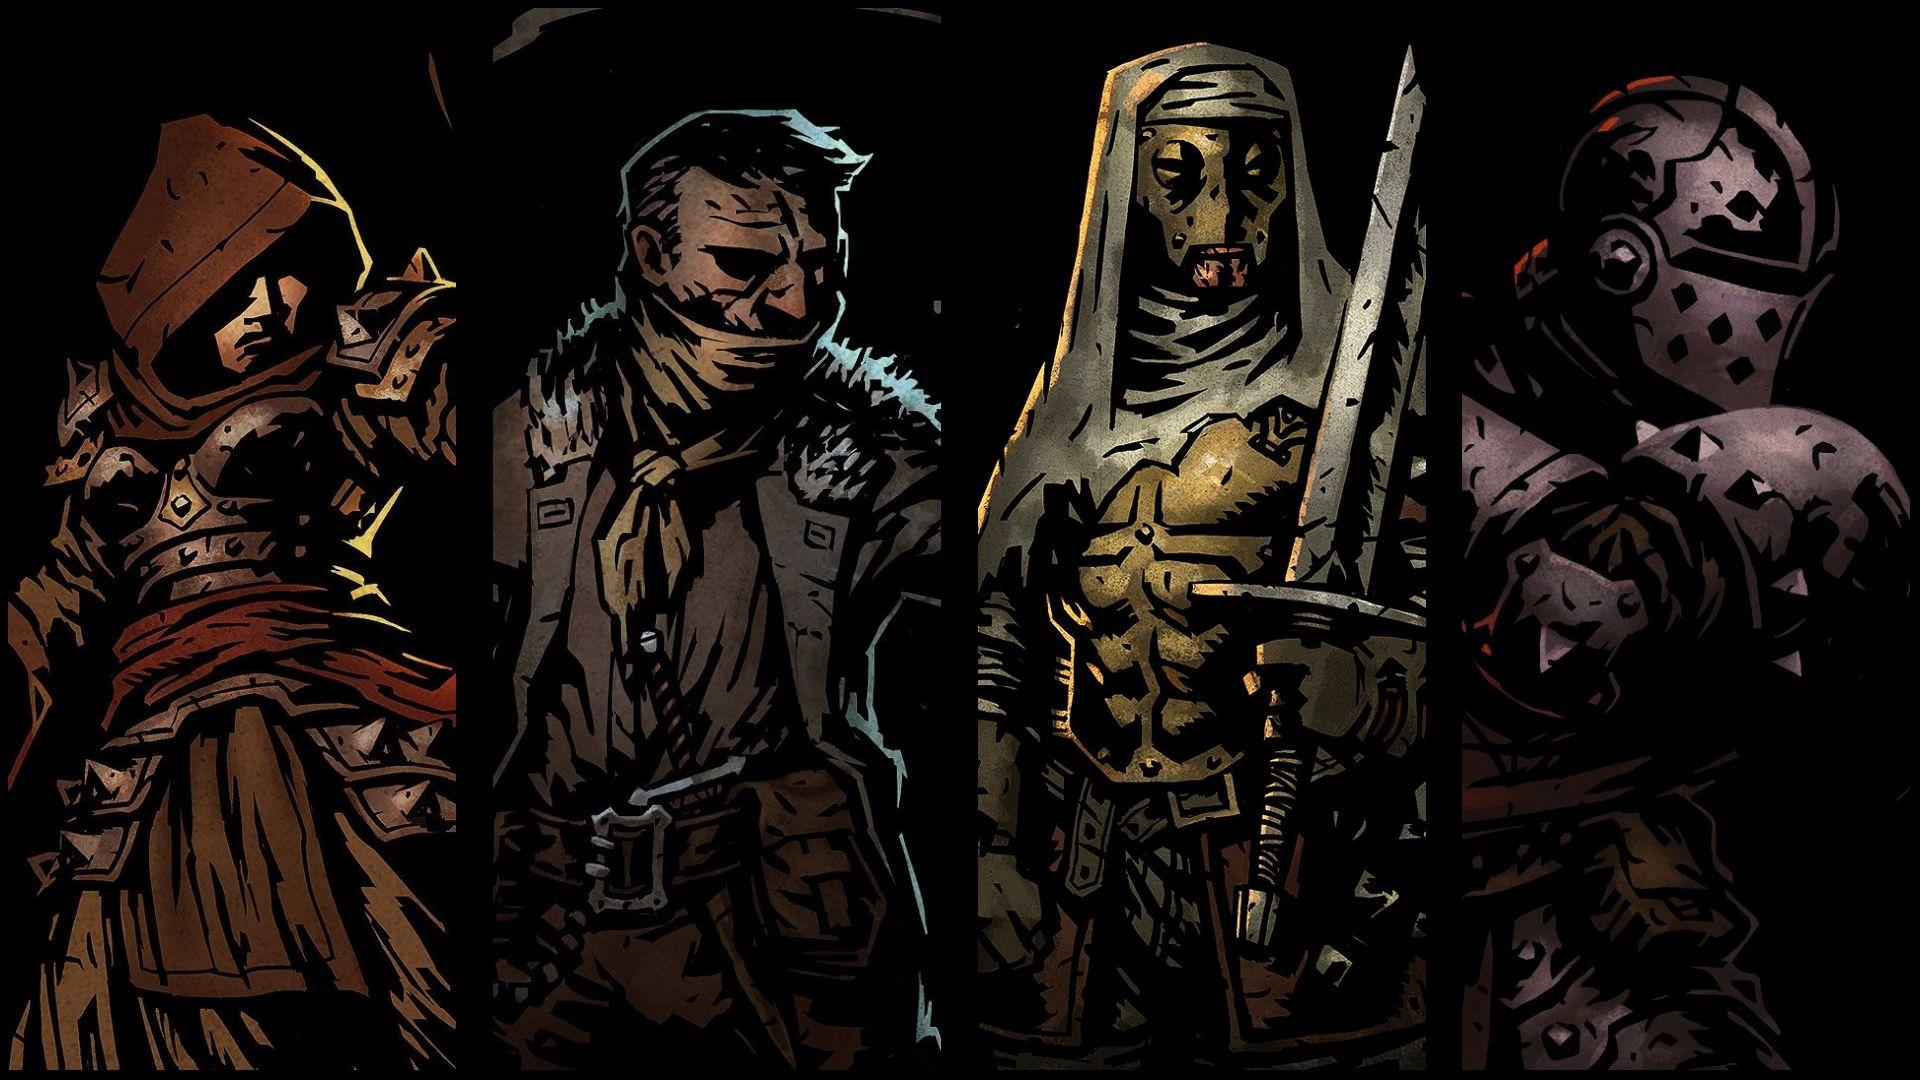 darkest dungeon hero has had a question mark for 2 weeks